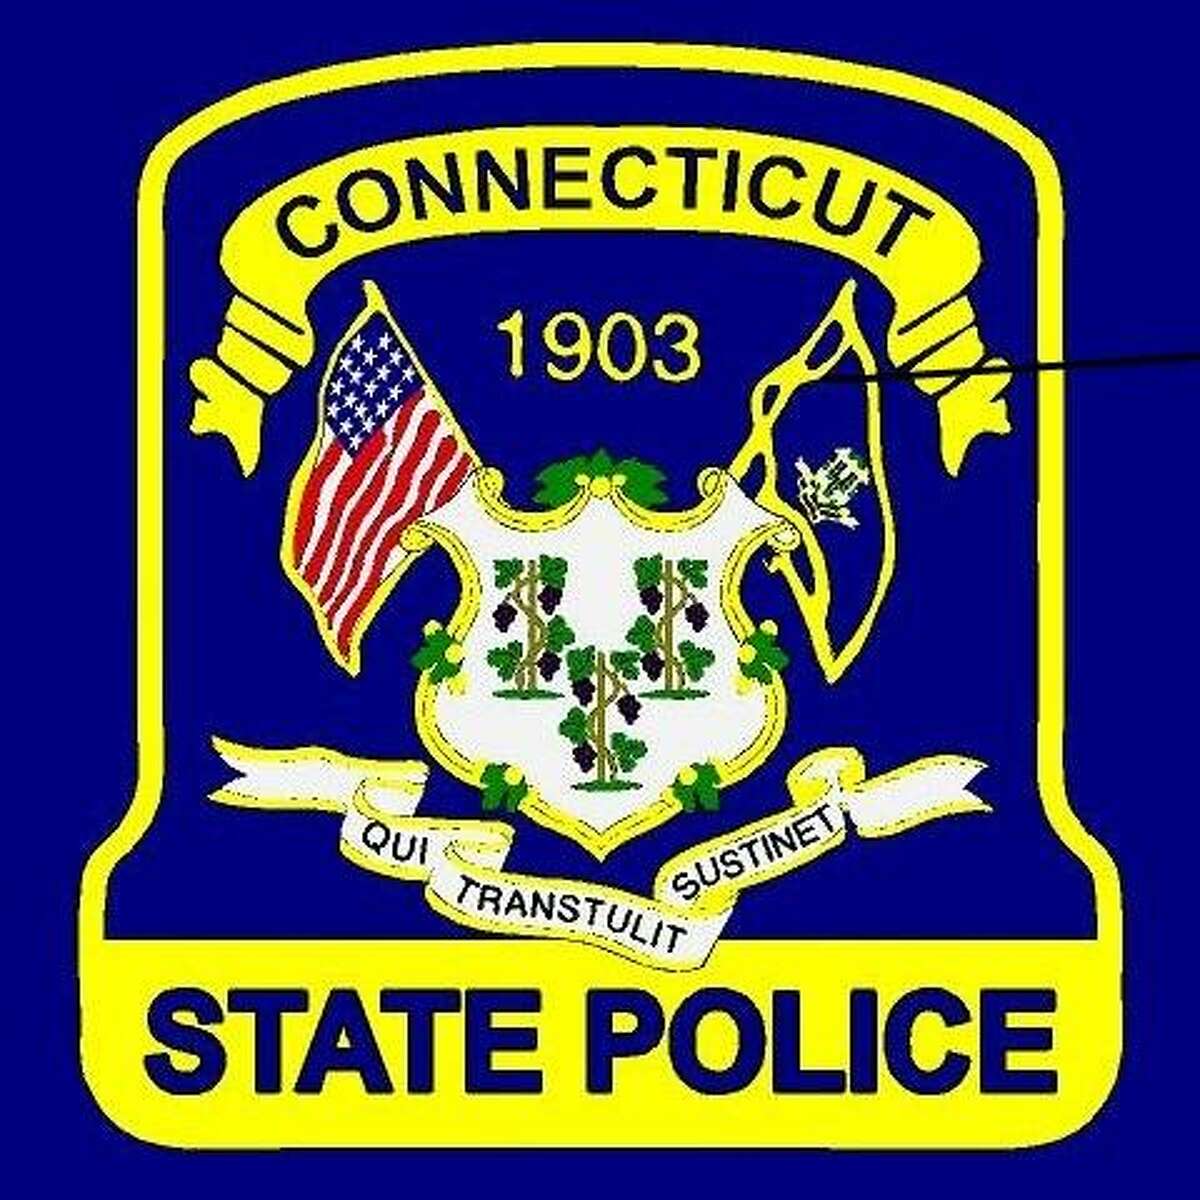 Want to be a CT state trooper? Here’s your chance